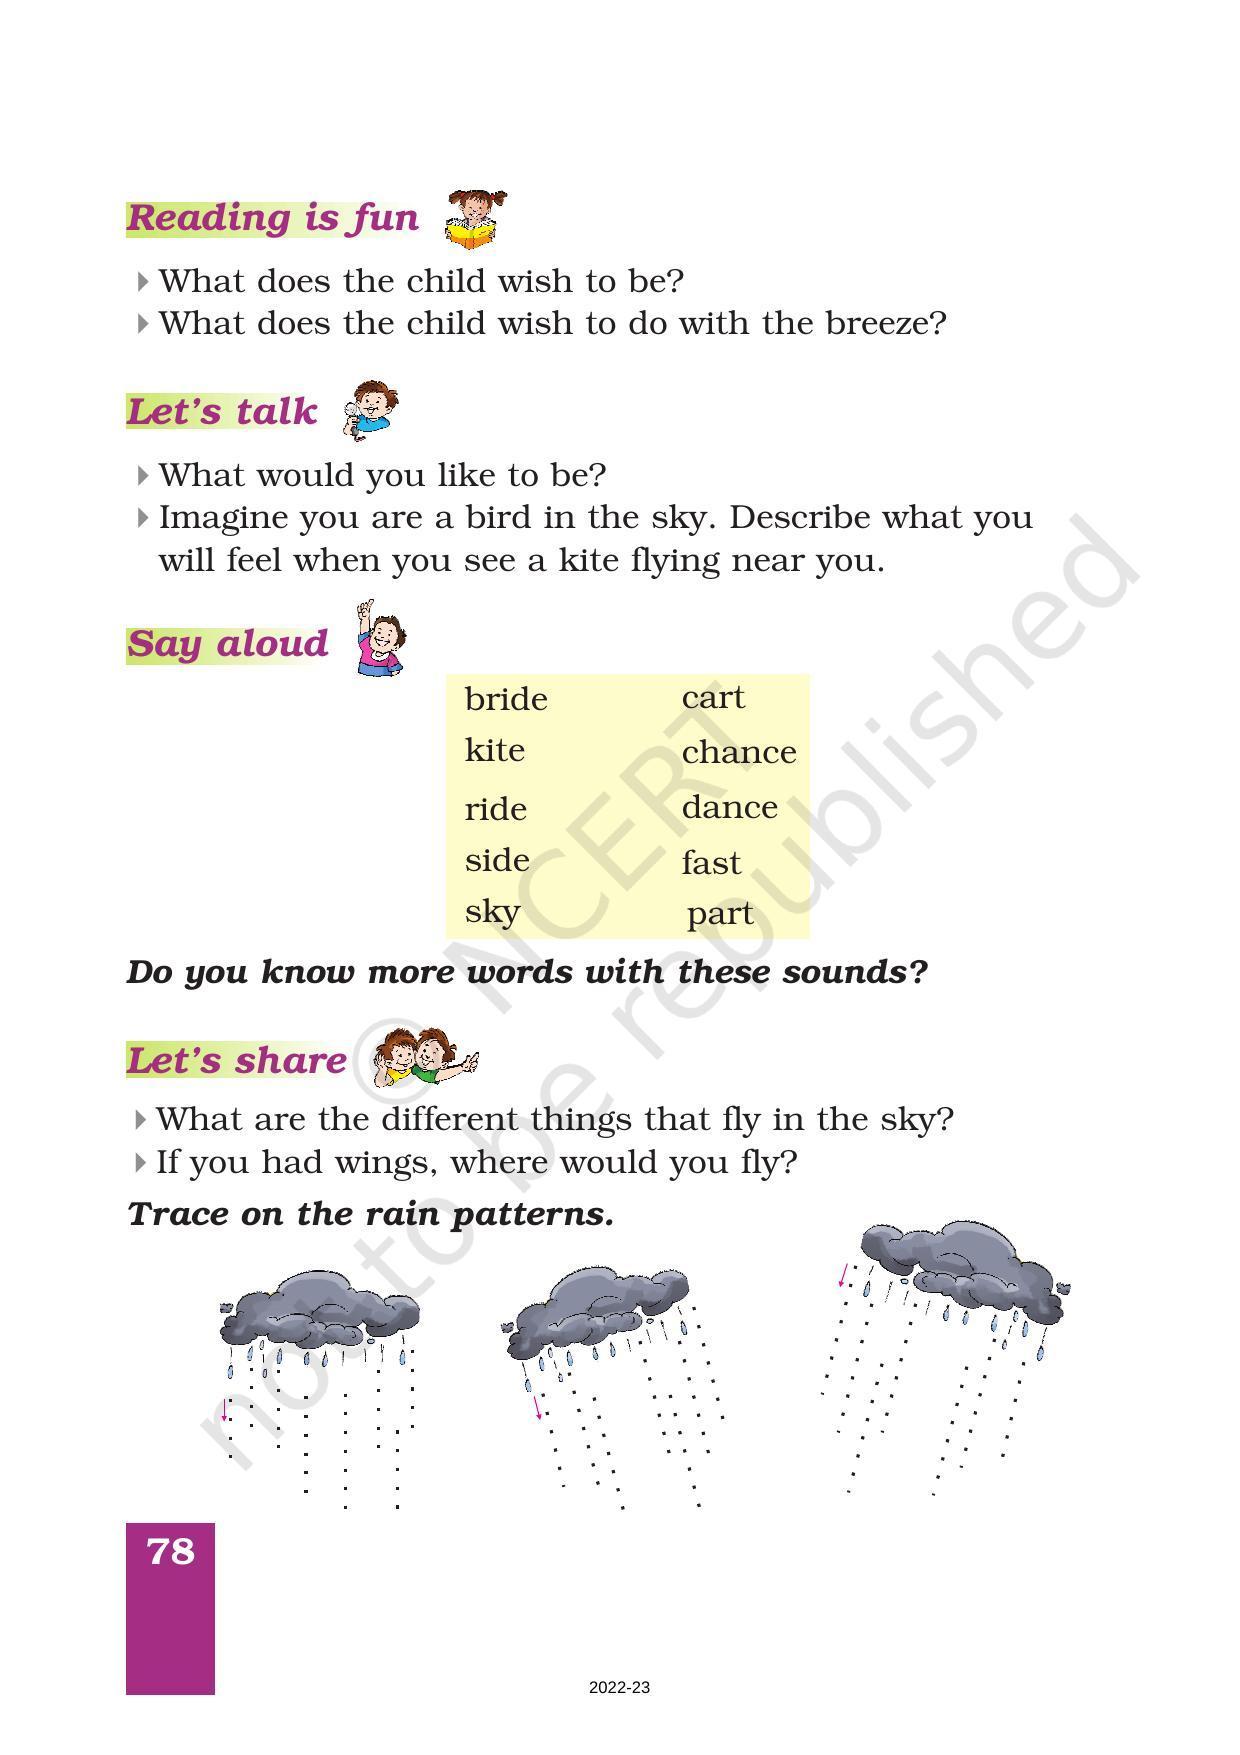 NCERT Book for Class 1 English (Marigold):Unit 7 Poem-A Kite - Page 2